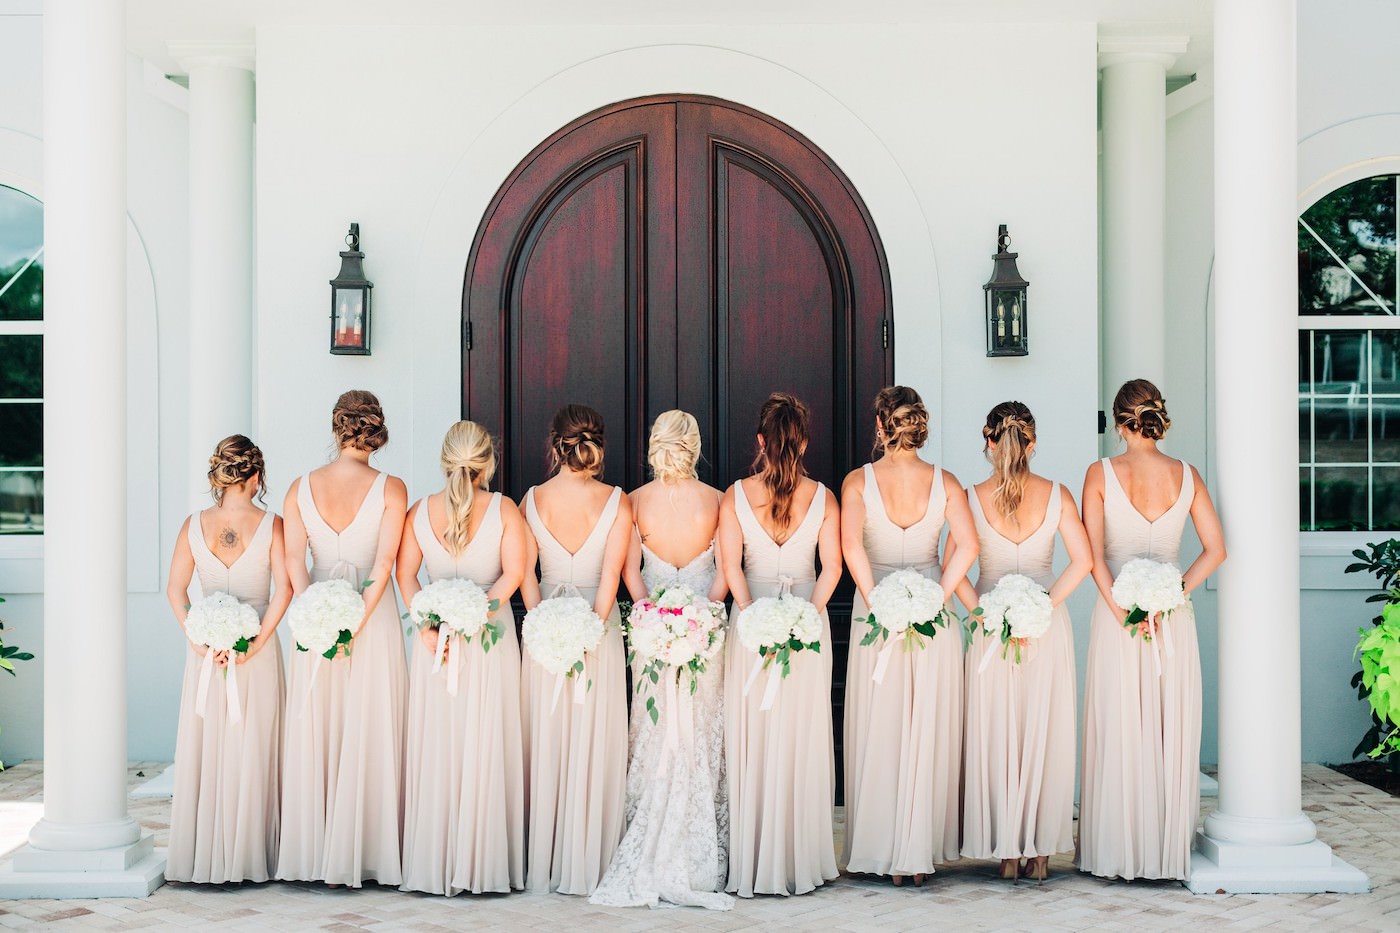 Outdoor Wedding Bridal Party Portrait | Neutral Nude Champagne Watters Bridesmaid Dresses from Bella Bridesmaid | White Hydrangea Bouquets with Cascading Ribbon | Champagne and Ivory Lace Sheath Spaghetti Strap Wedding Dress Bridal Gown with Low Back